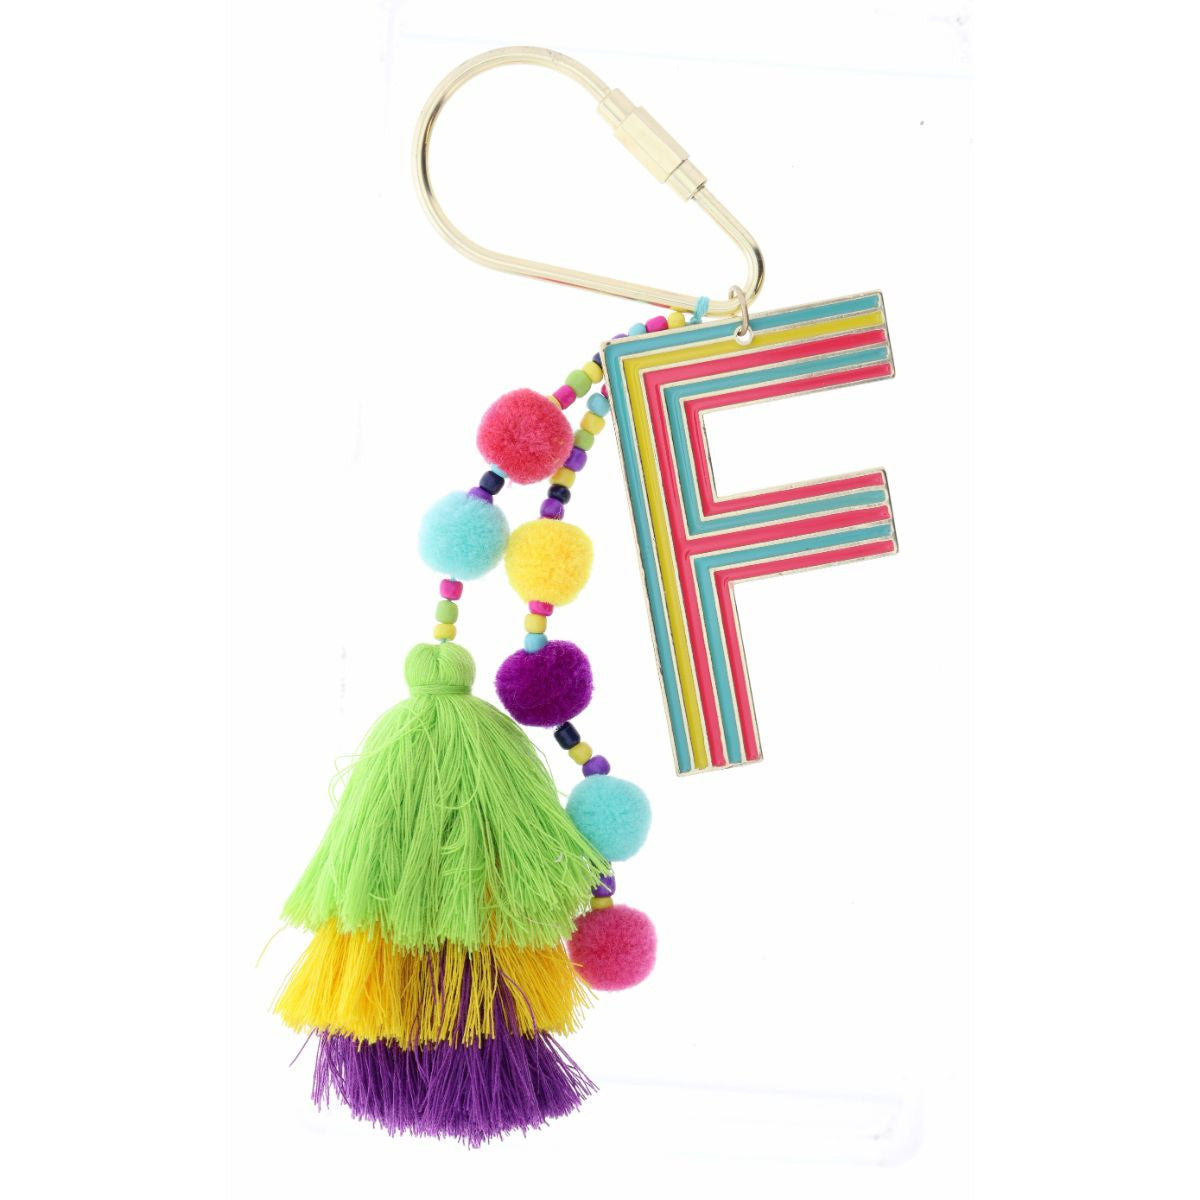 "f" tagged for me keychain on a white background